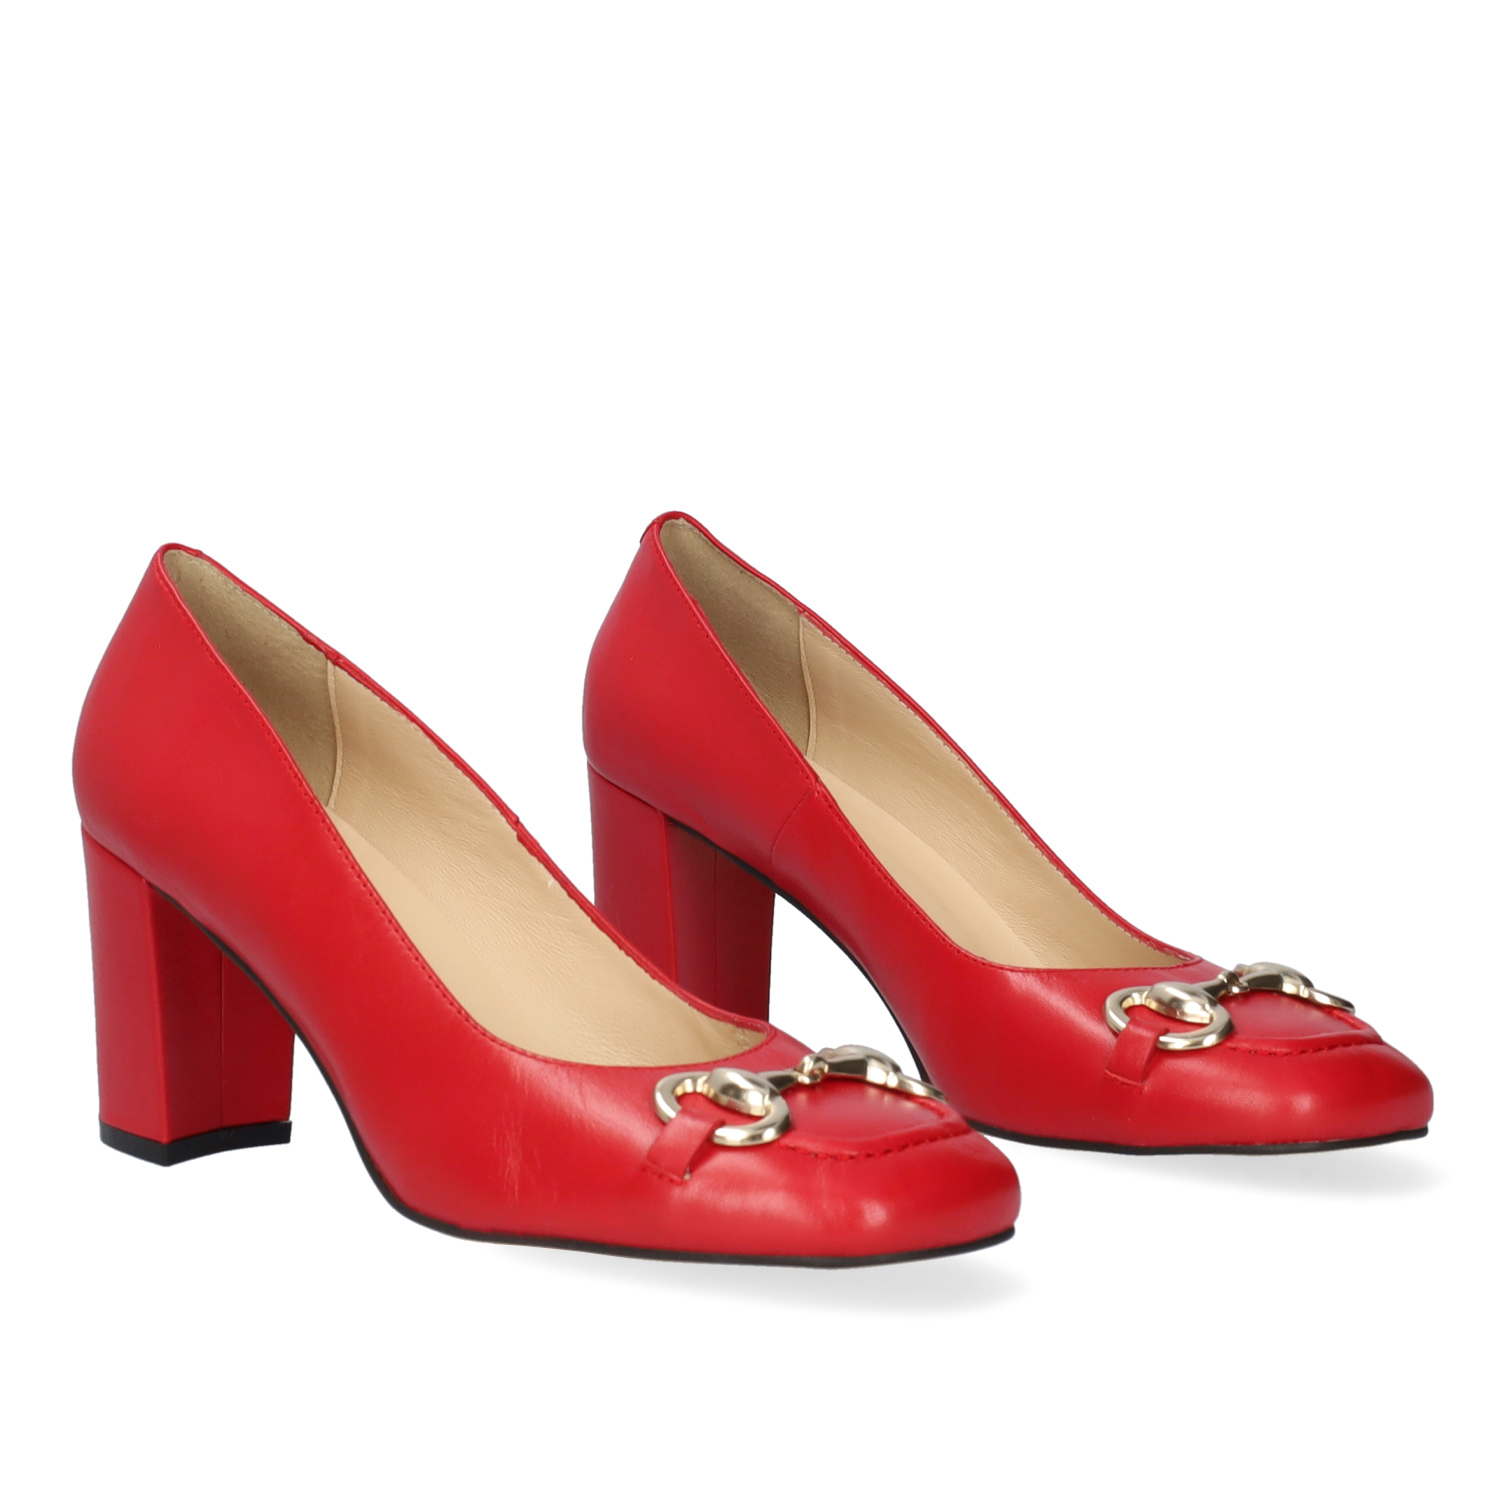 Vintage style heeled shoes in red leather 